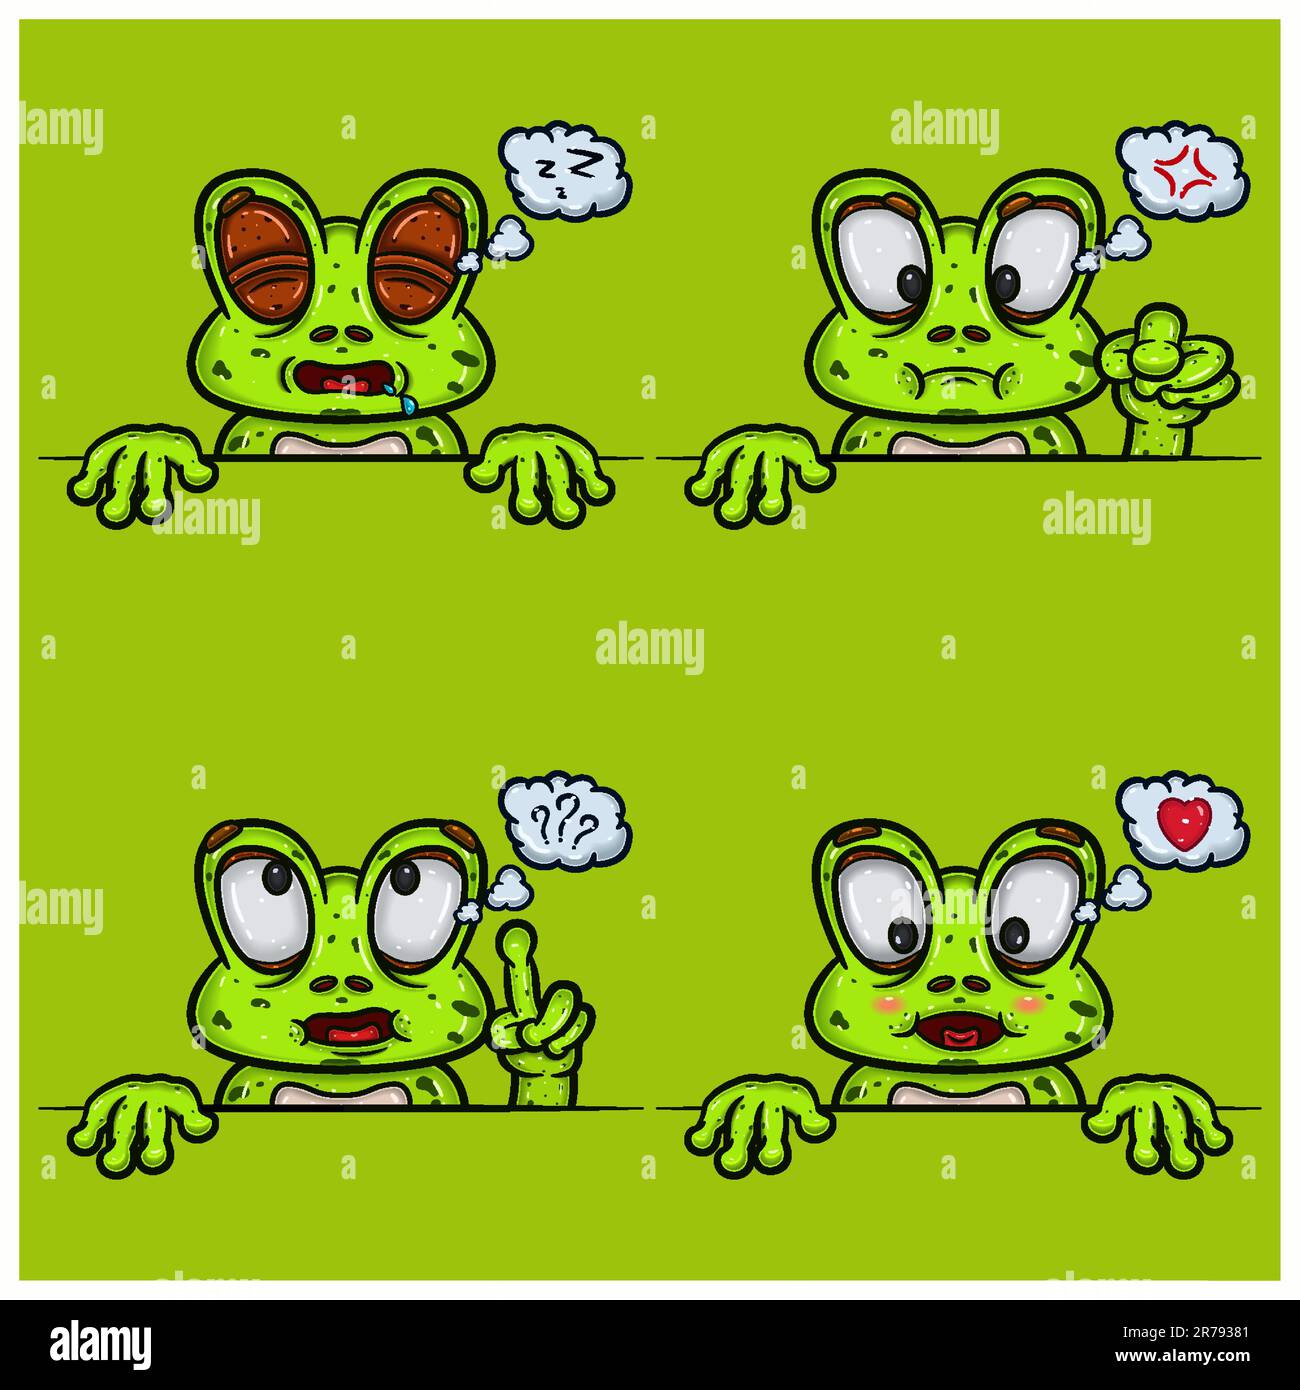 Set Of Expression Frog Face Cartoon. Sleep, Angry, Confused and Loving Face Expression. With Simple Gradient. Vector and Illustration. Stock Vector